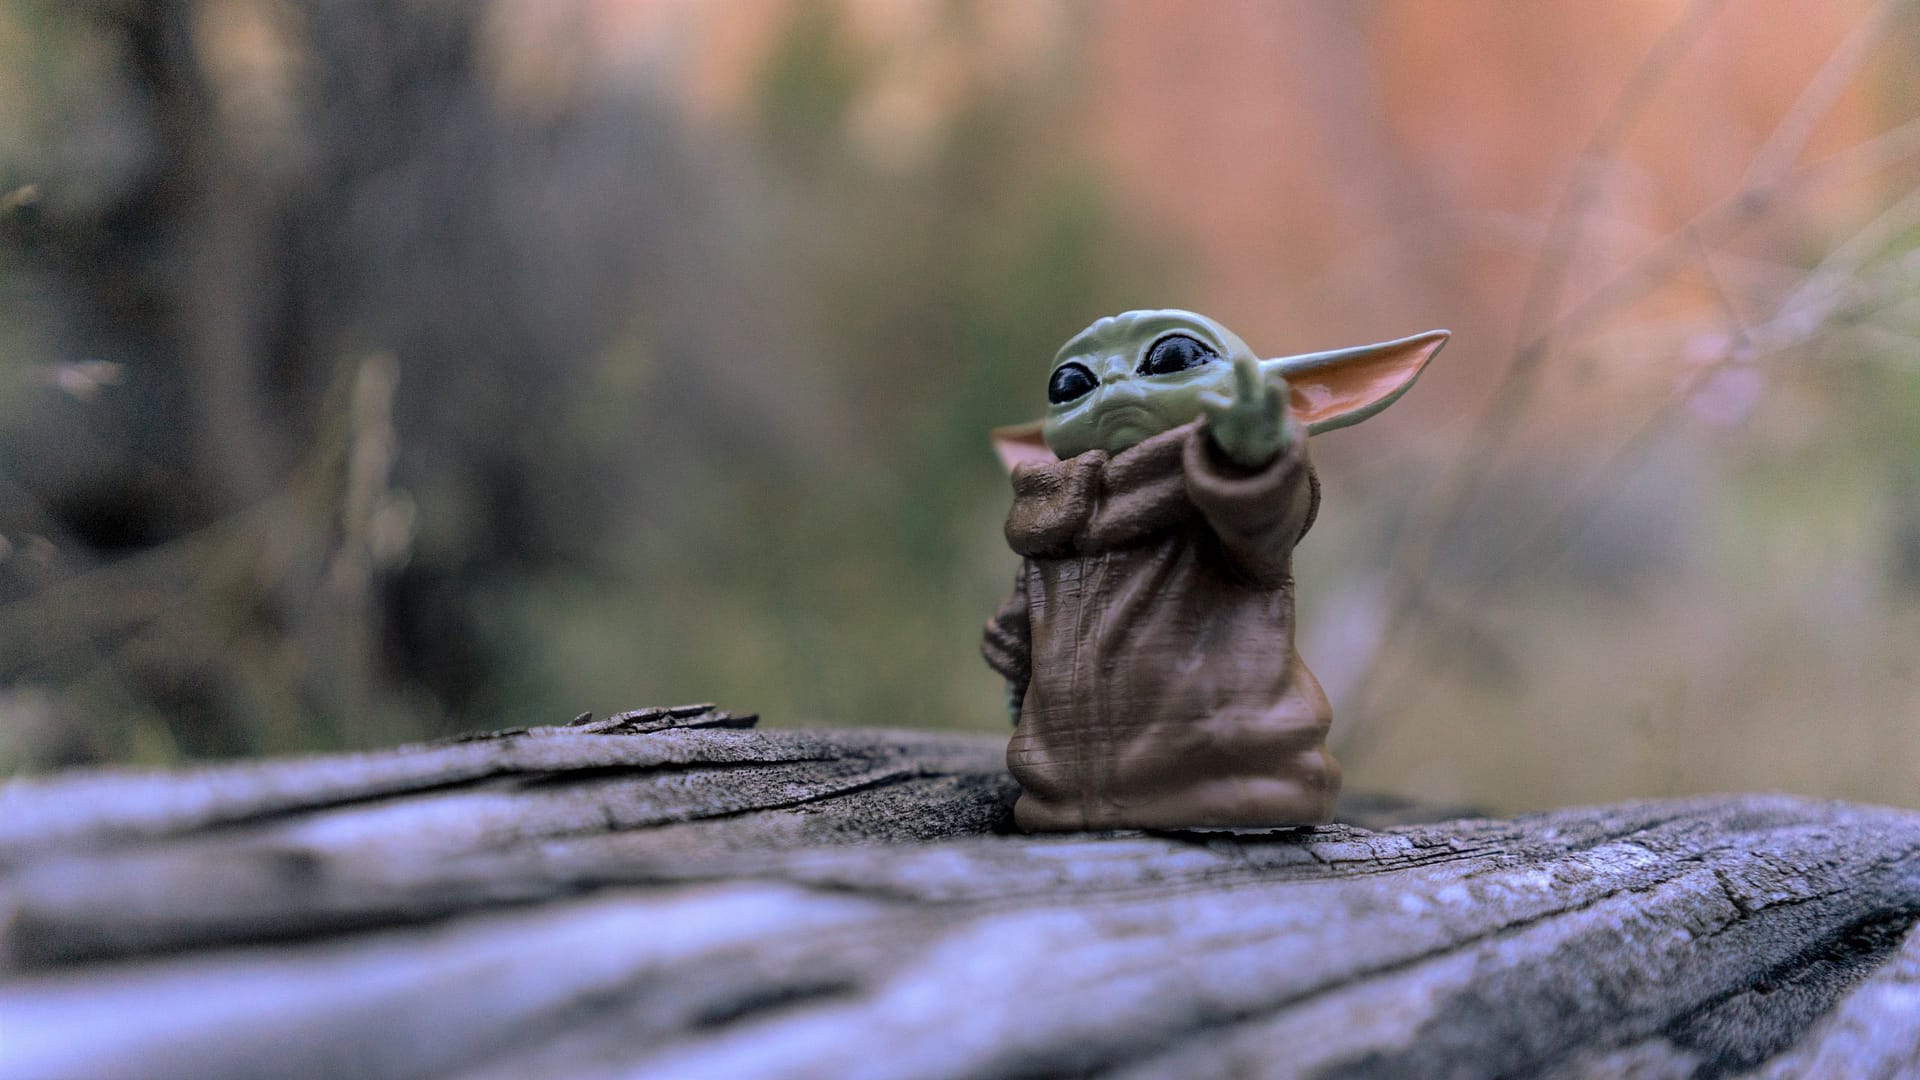 Image: Figurine of Baby Yoda, from the Mandalorian--filmed in the Volume 